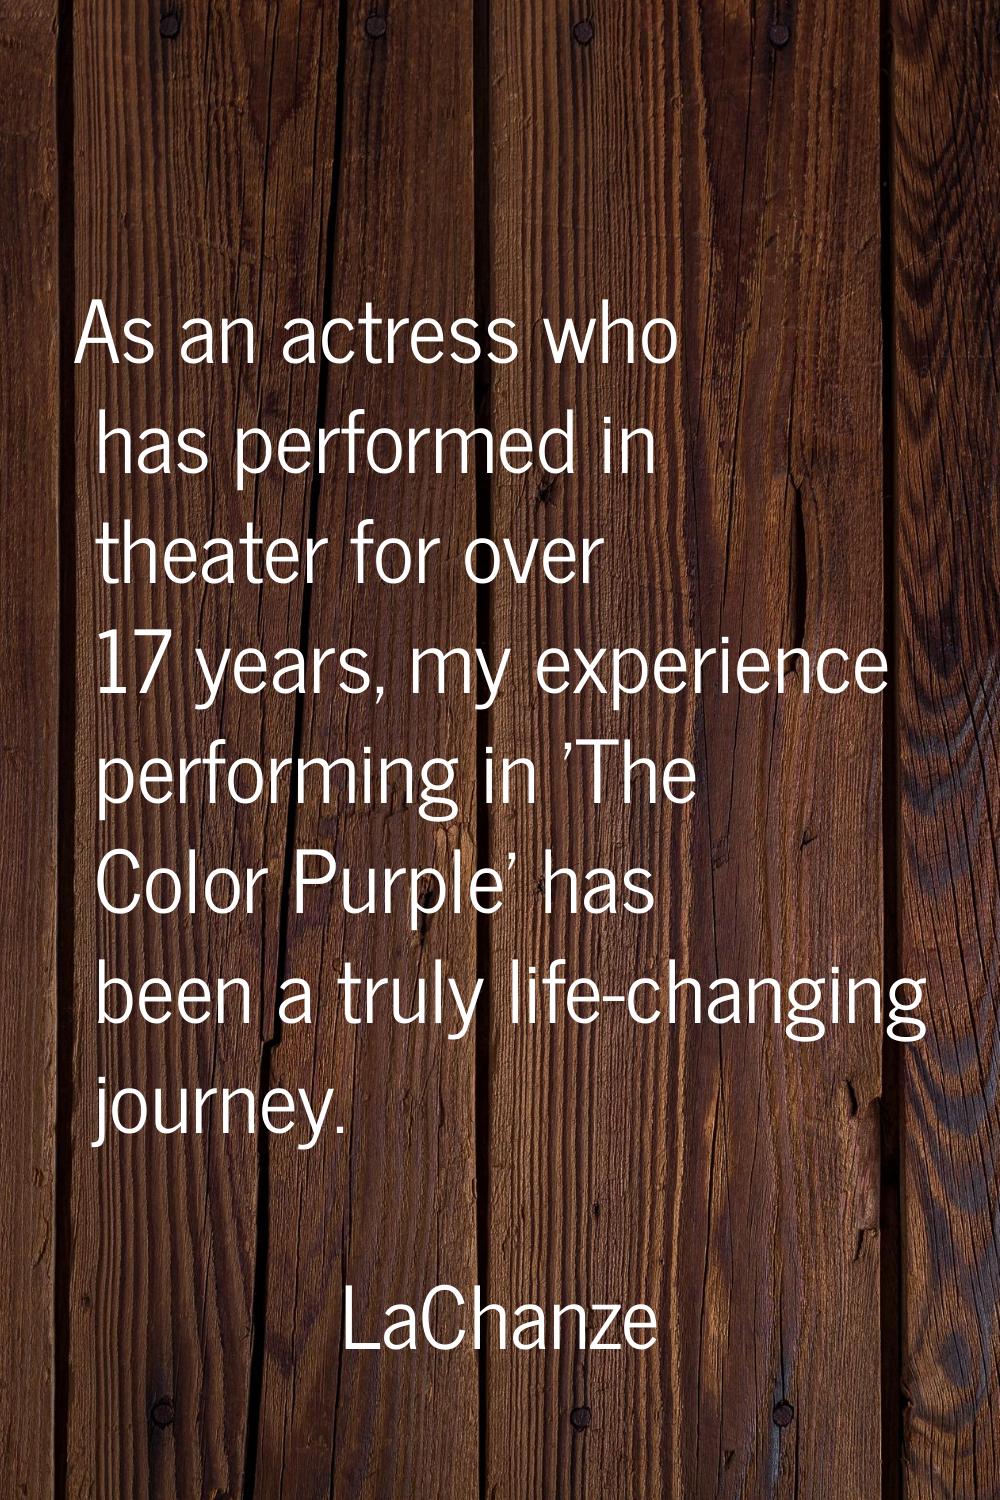 As an actress who has performed in theater for over 17 years, my experience performing in 'The Colo